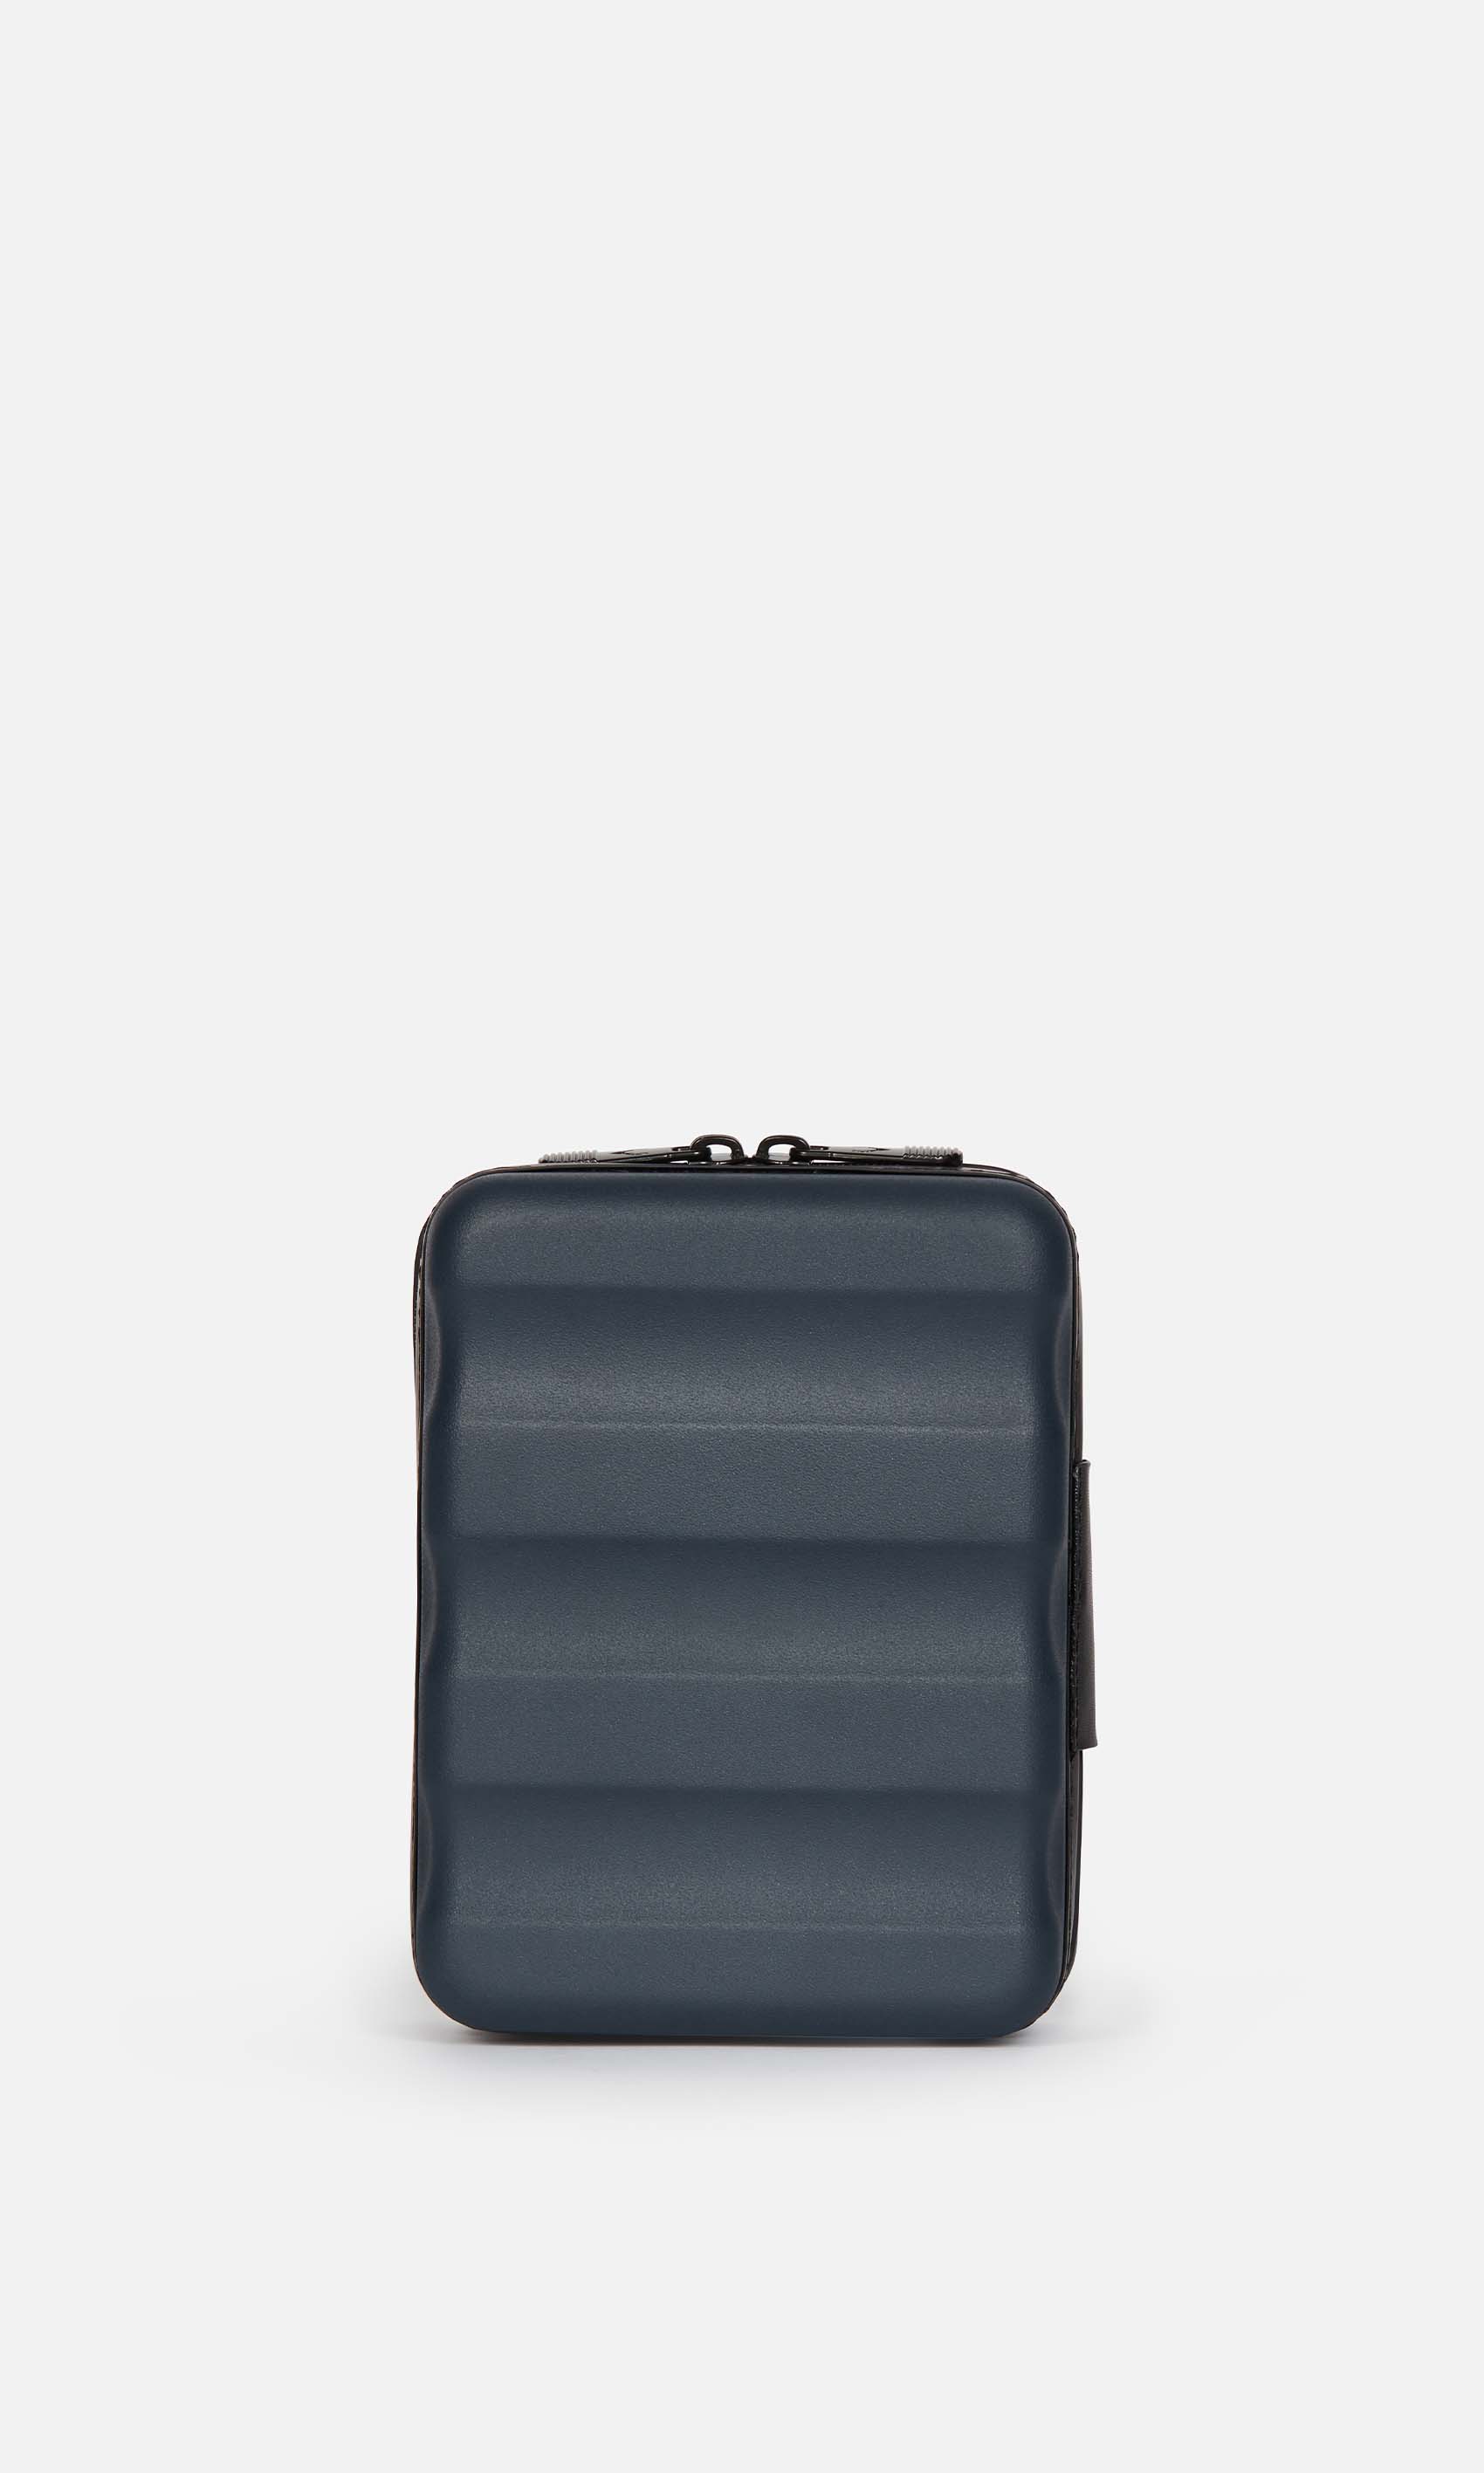 Antler Luggage -  Clifton mini in navy - Hard Suitcases Clifton Mini Case Navy | Travel Gifts & Accessories | Antler